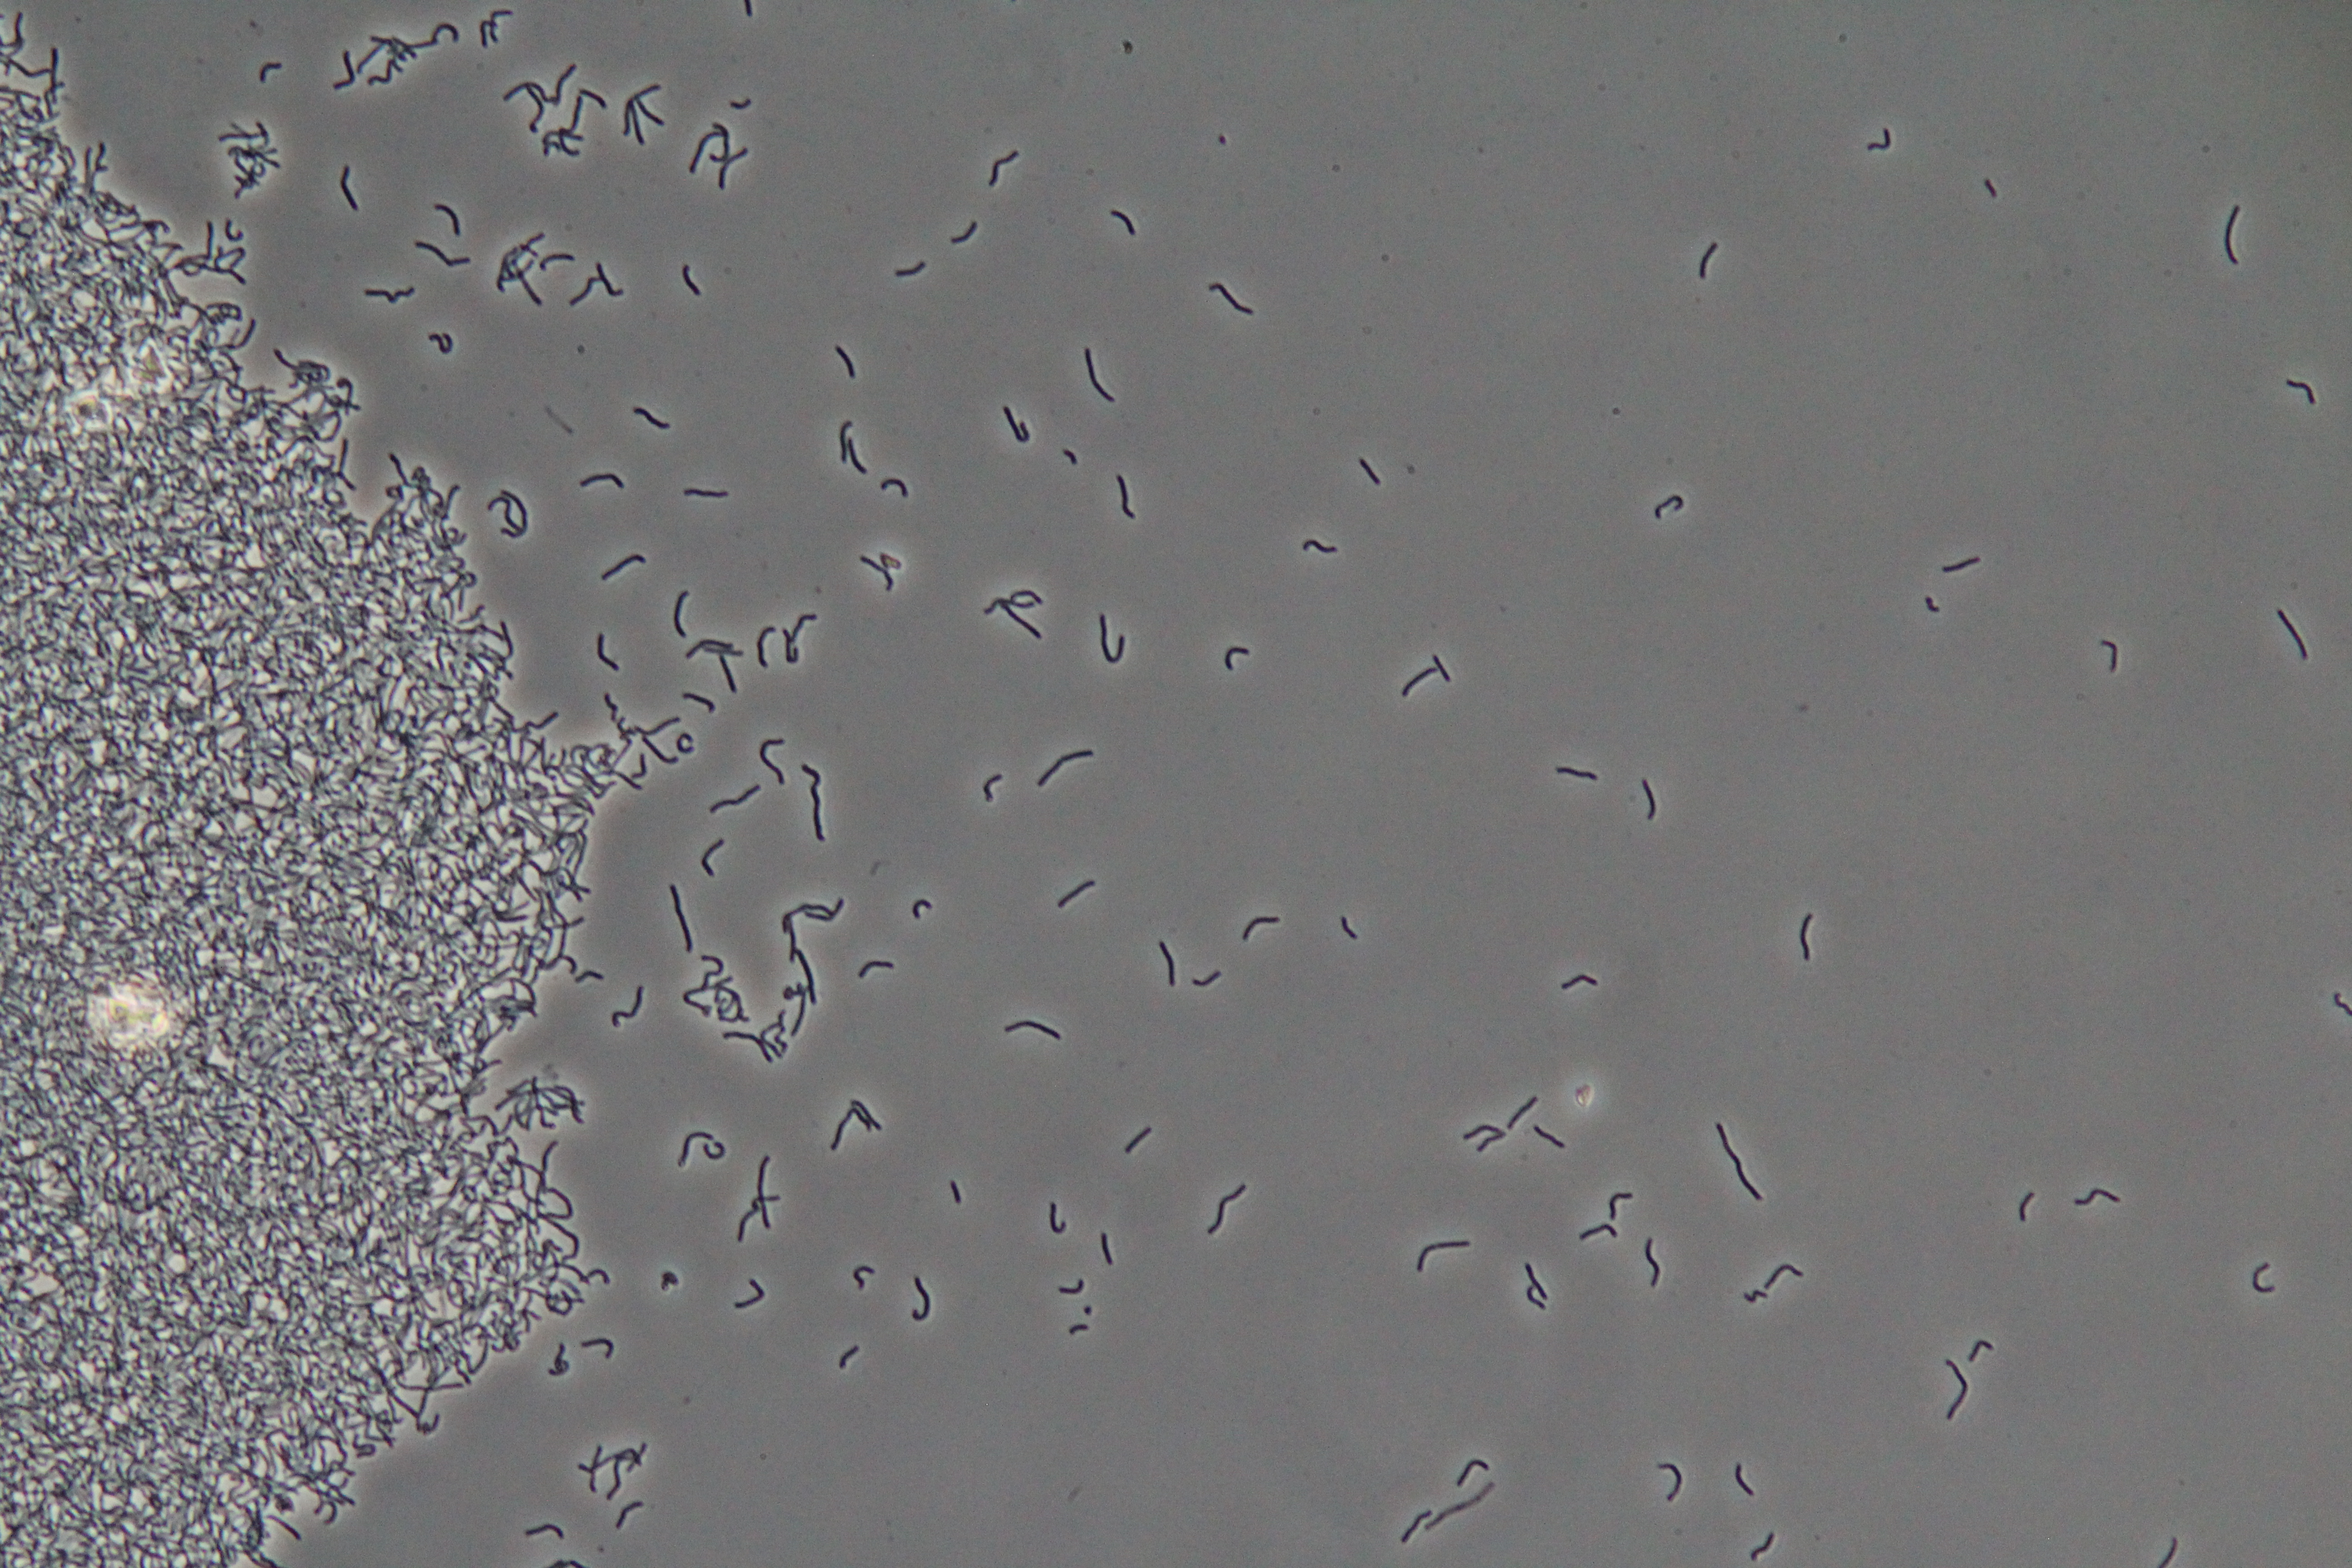 0012 - clump of WT bacillus  (phase contrast)